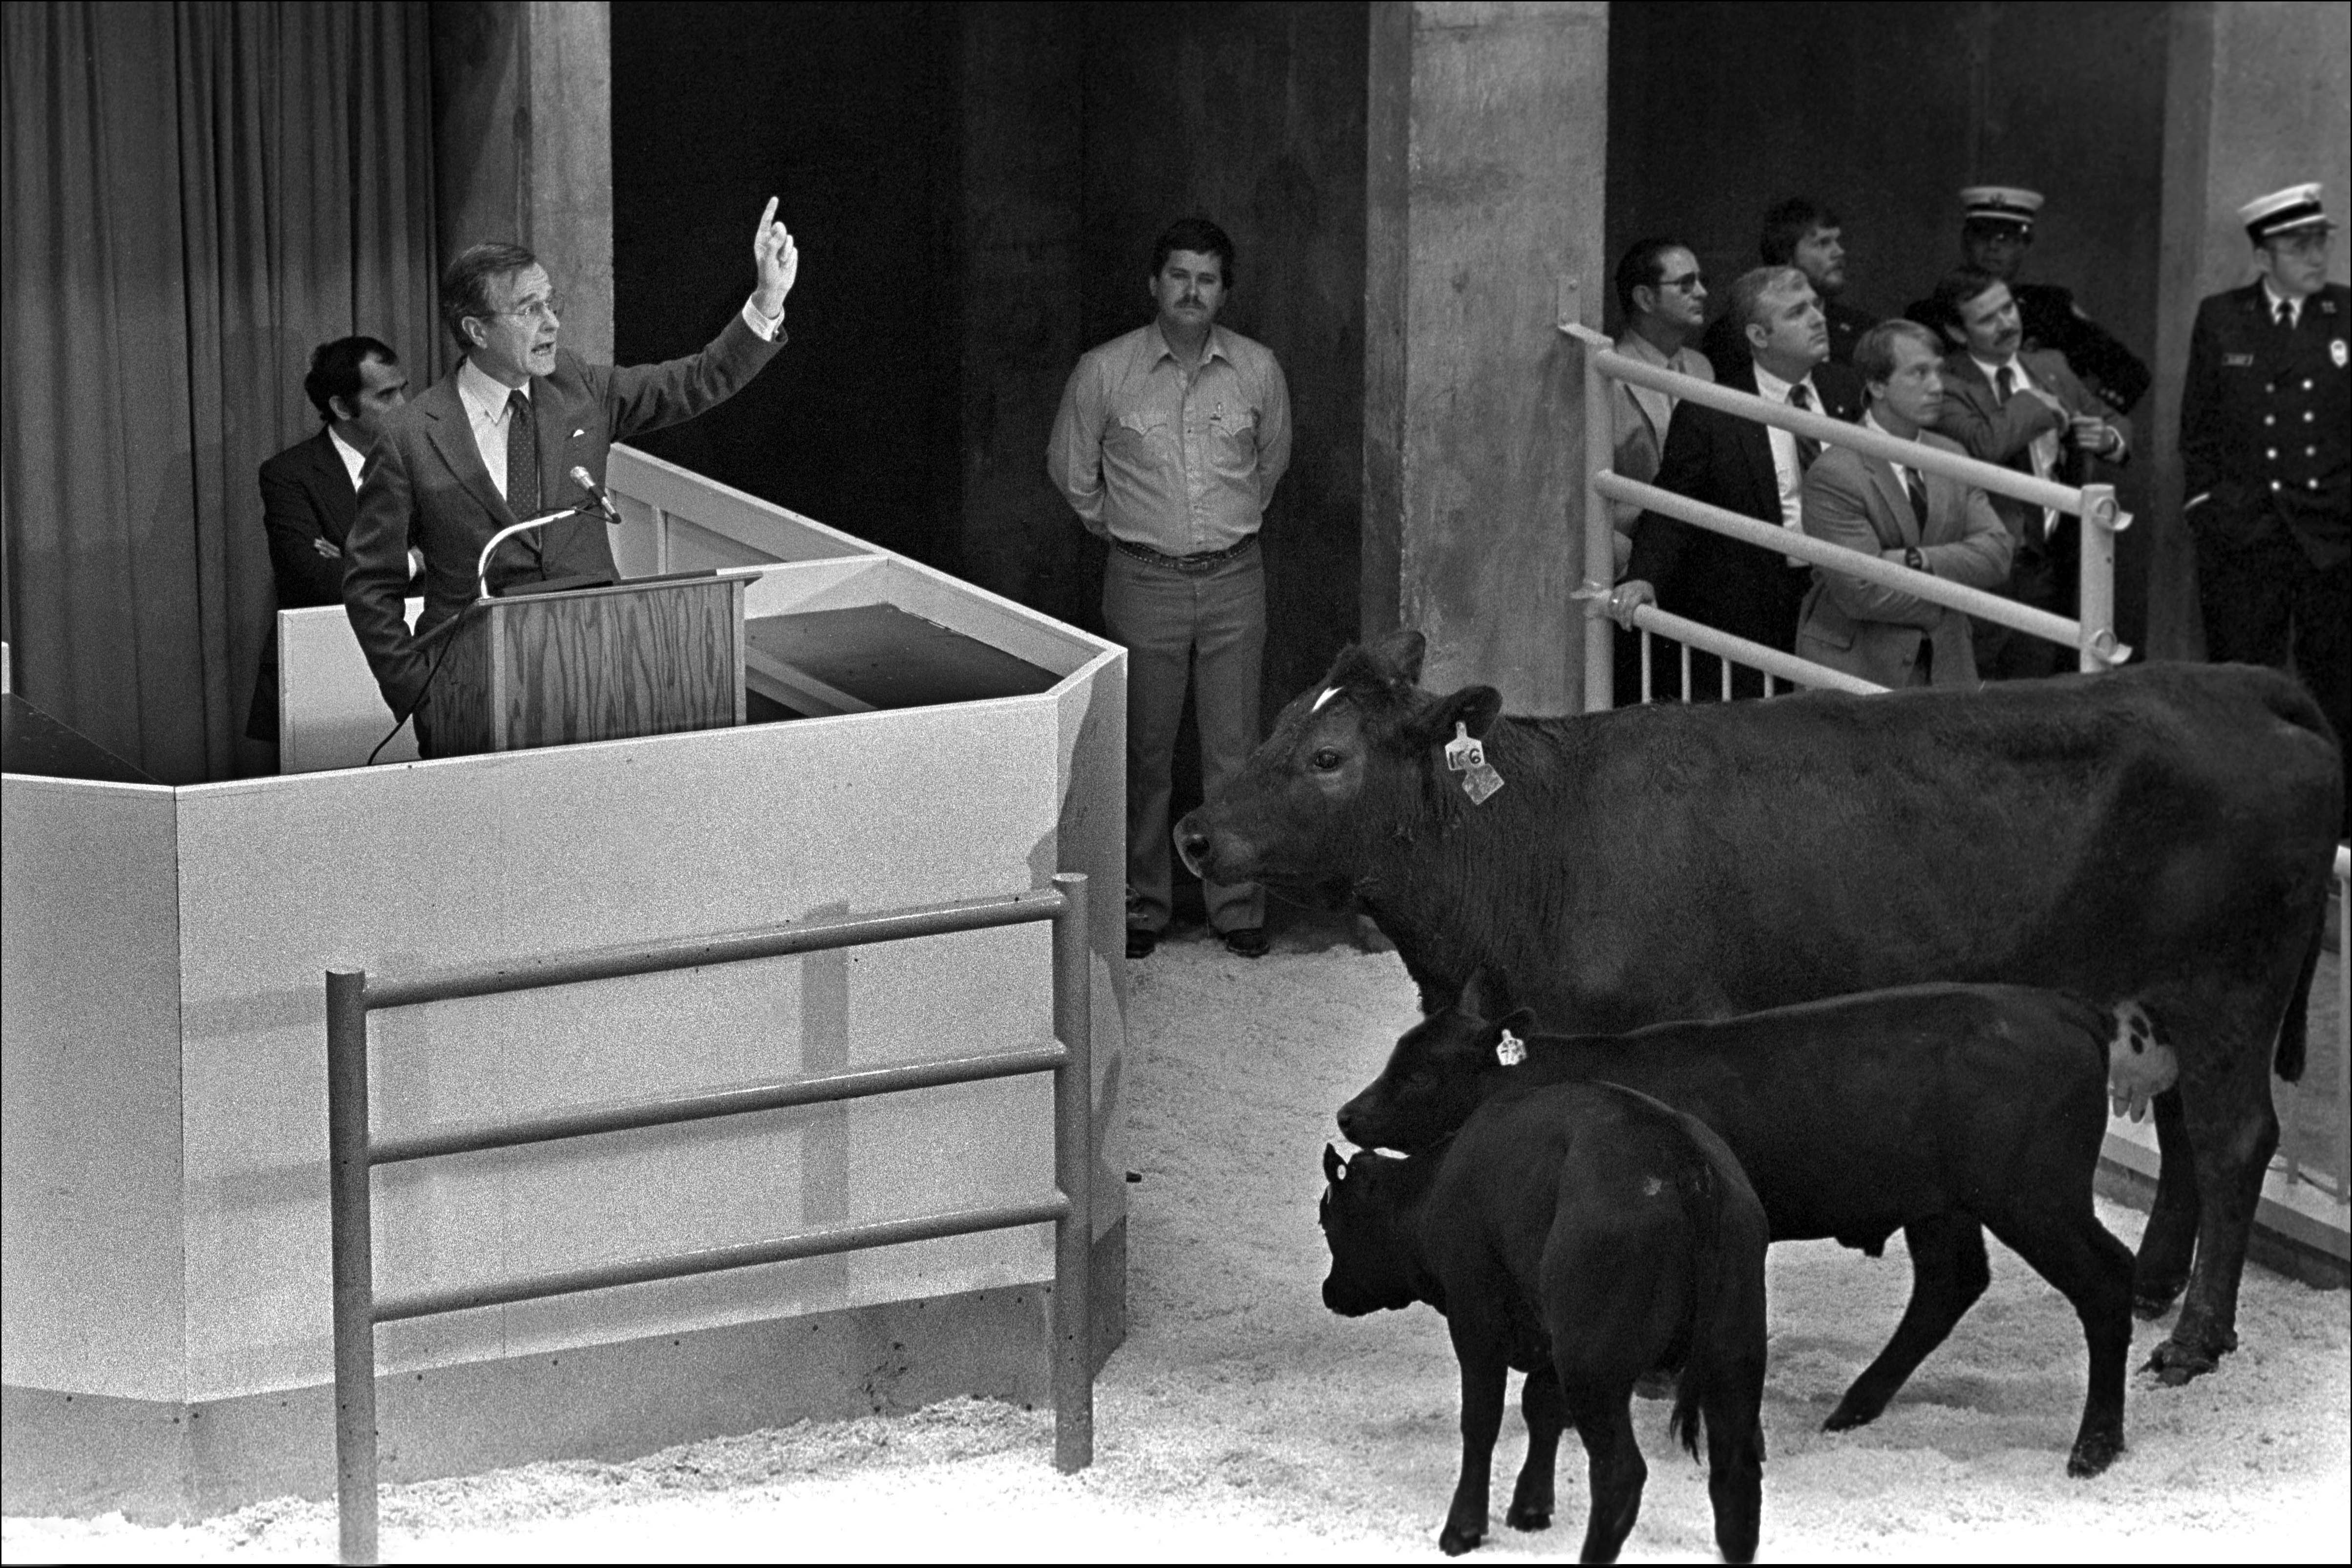 Vice President George Bush Senior make a speech to students as three cows stand close to where he is speaking.